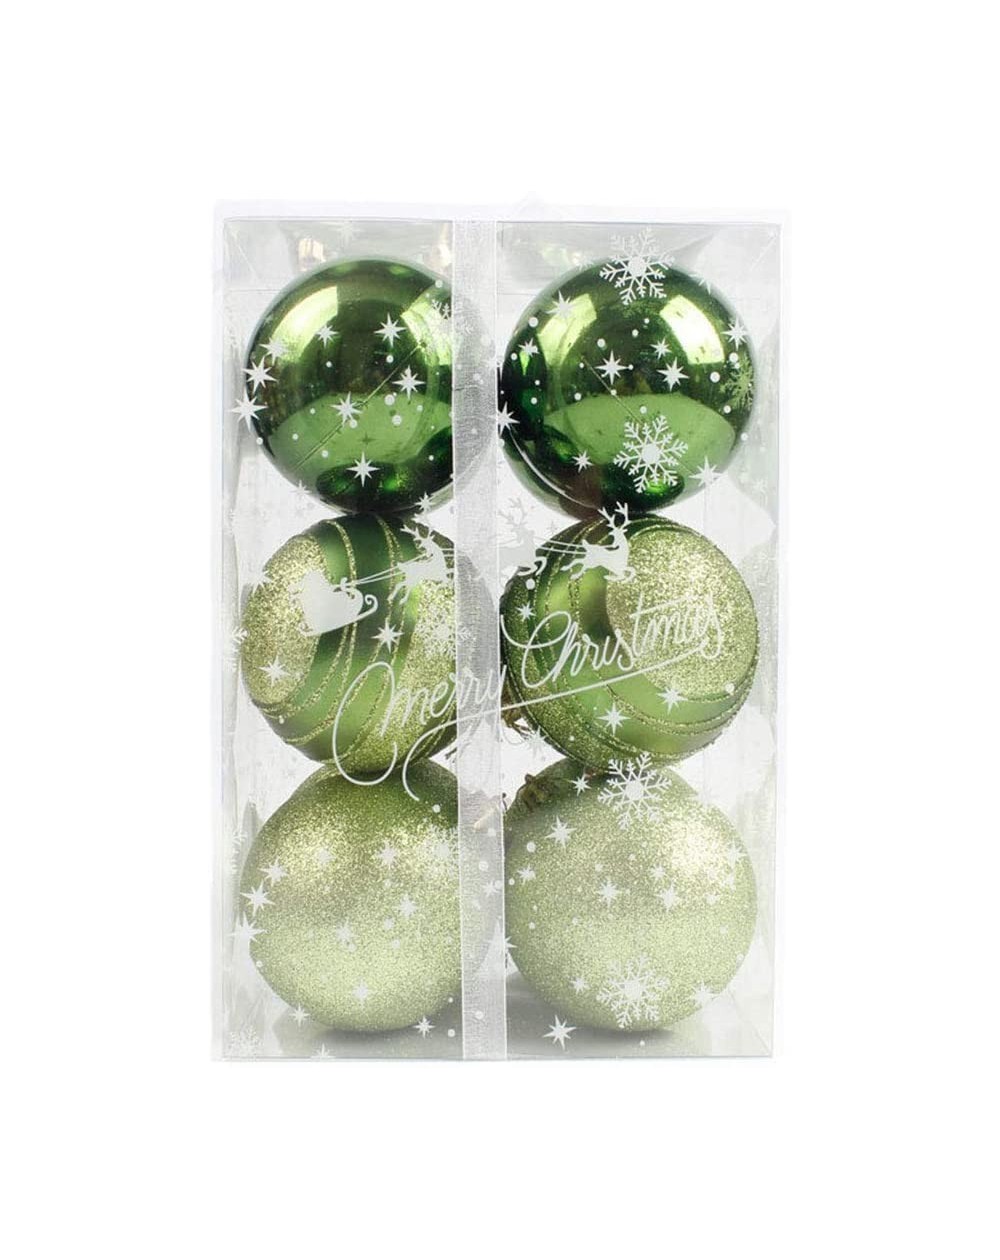 Balloons Christmas Balls Ornament for Xmas Trees - Shatterproof Christmas Tree Decorations Large Hanging Ball 12ct 3.15-Inch ...